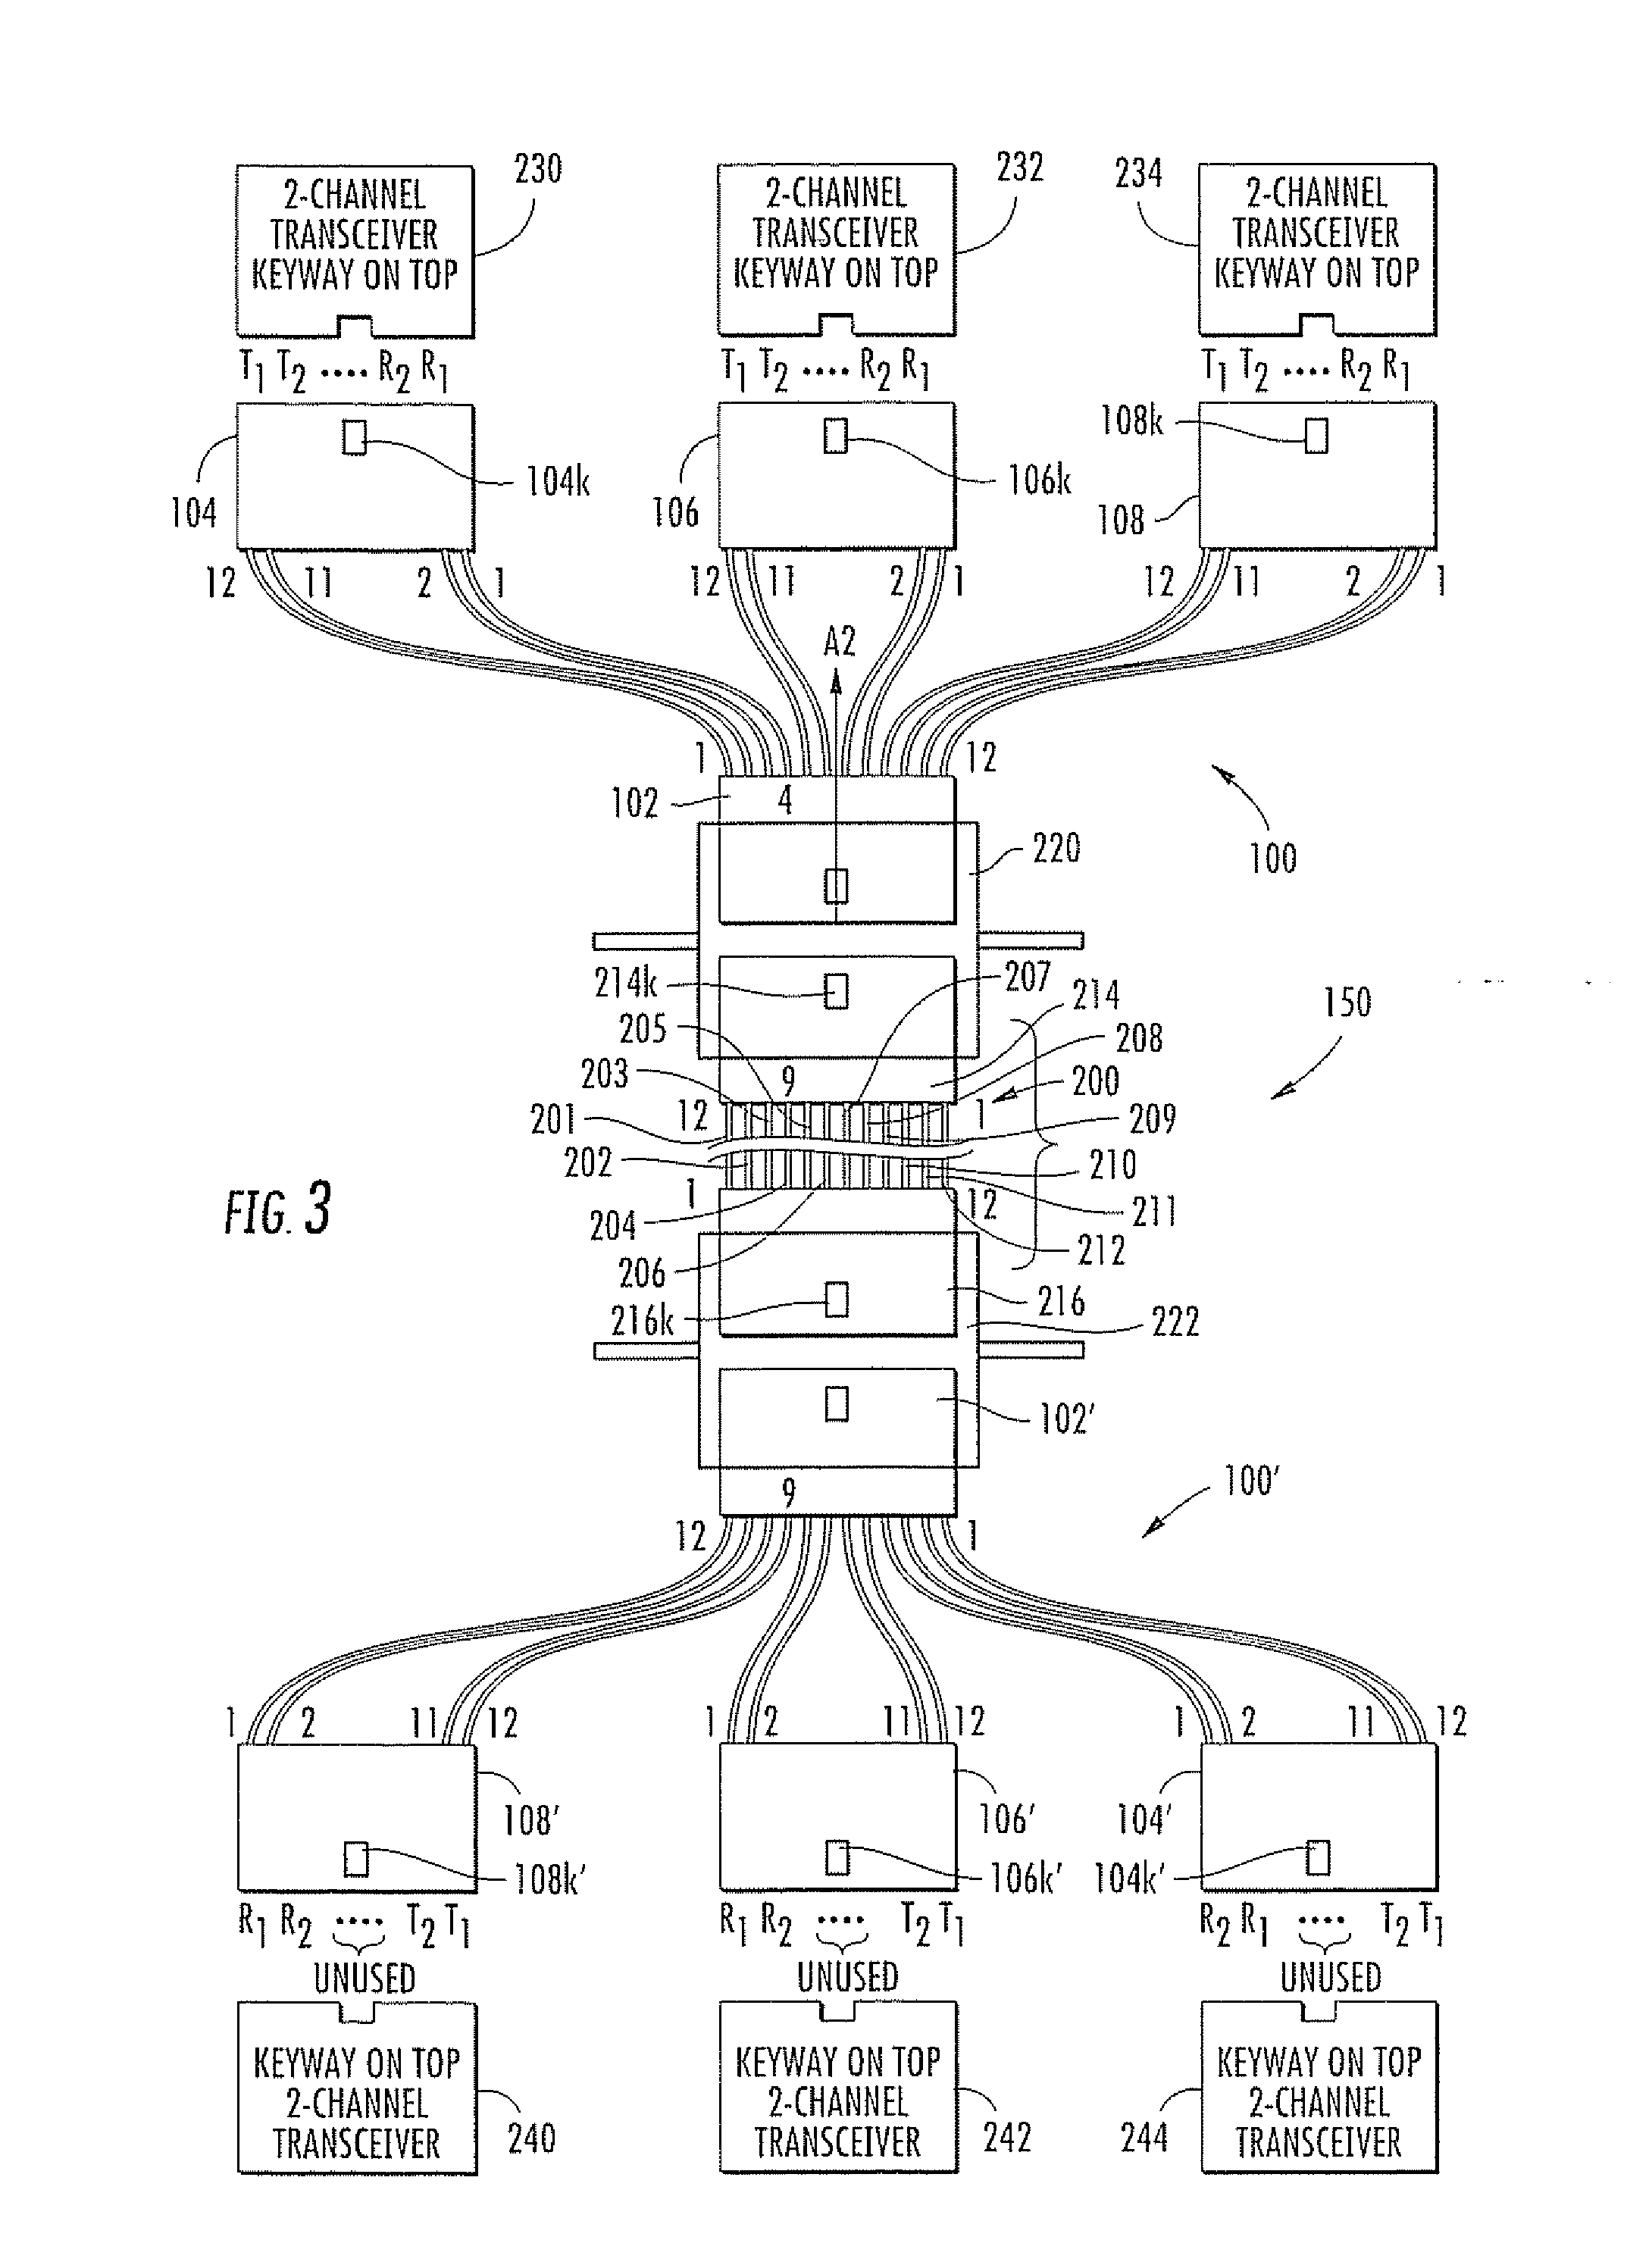 Optical Fiber Array Connectivity System for Multiple Transceivers and/or Multiple Trunk Cables